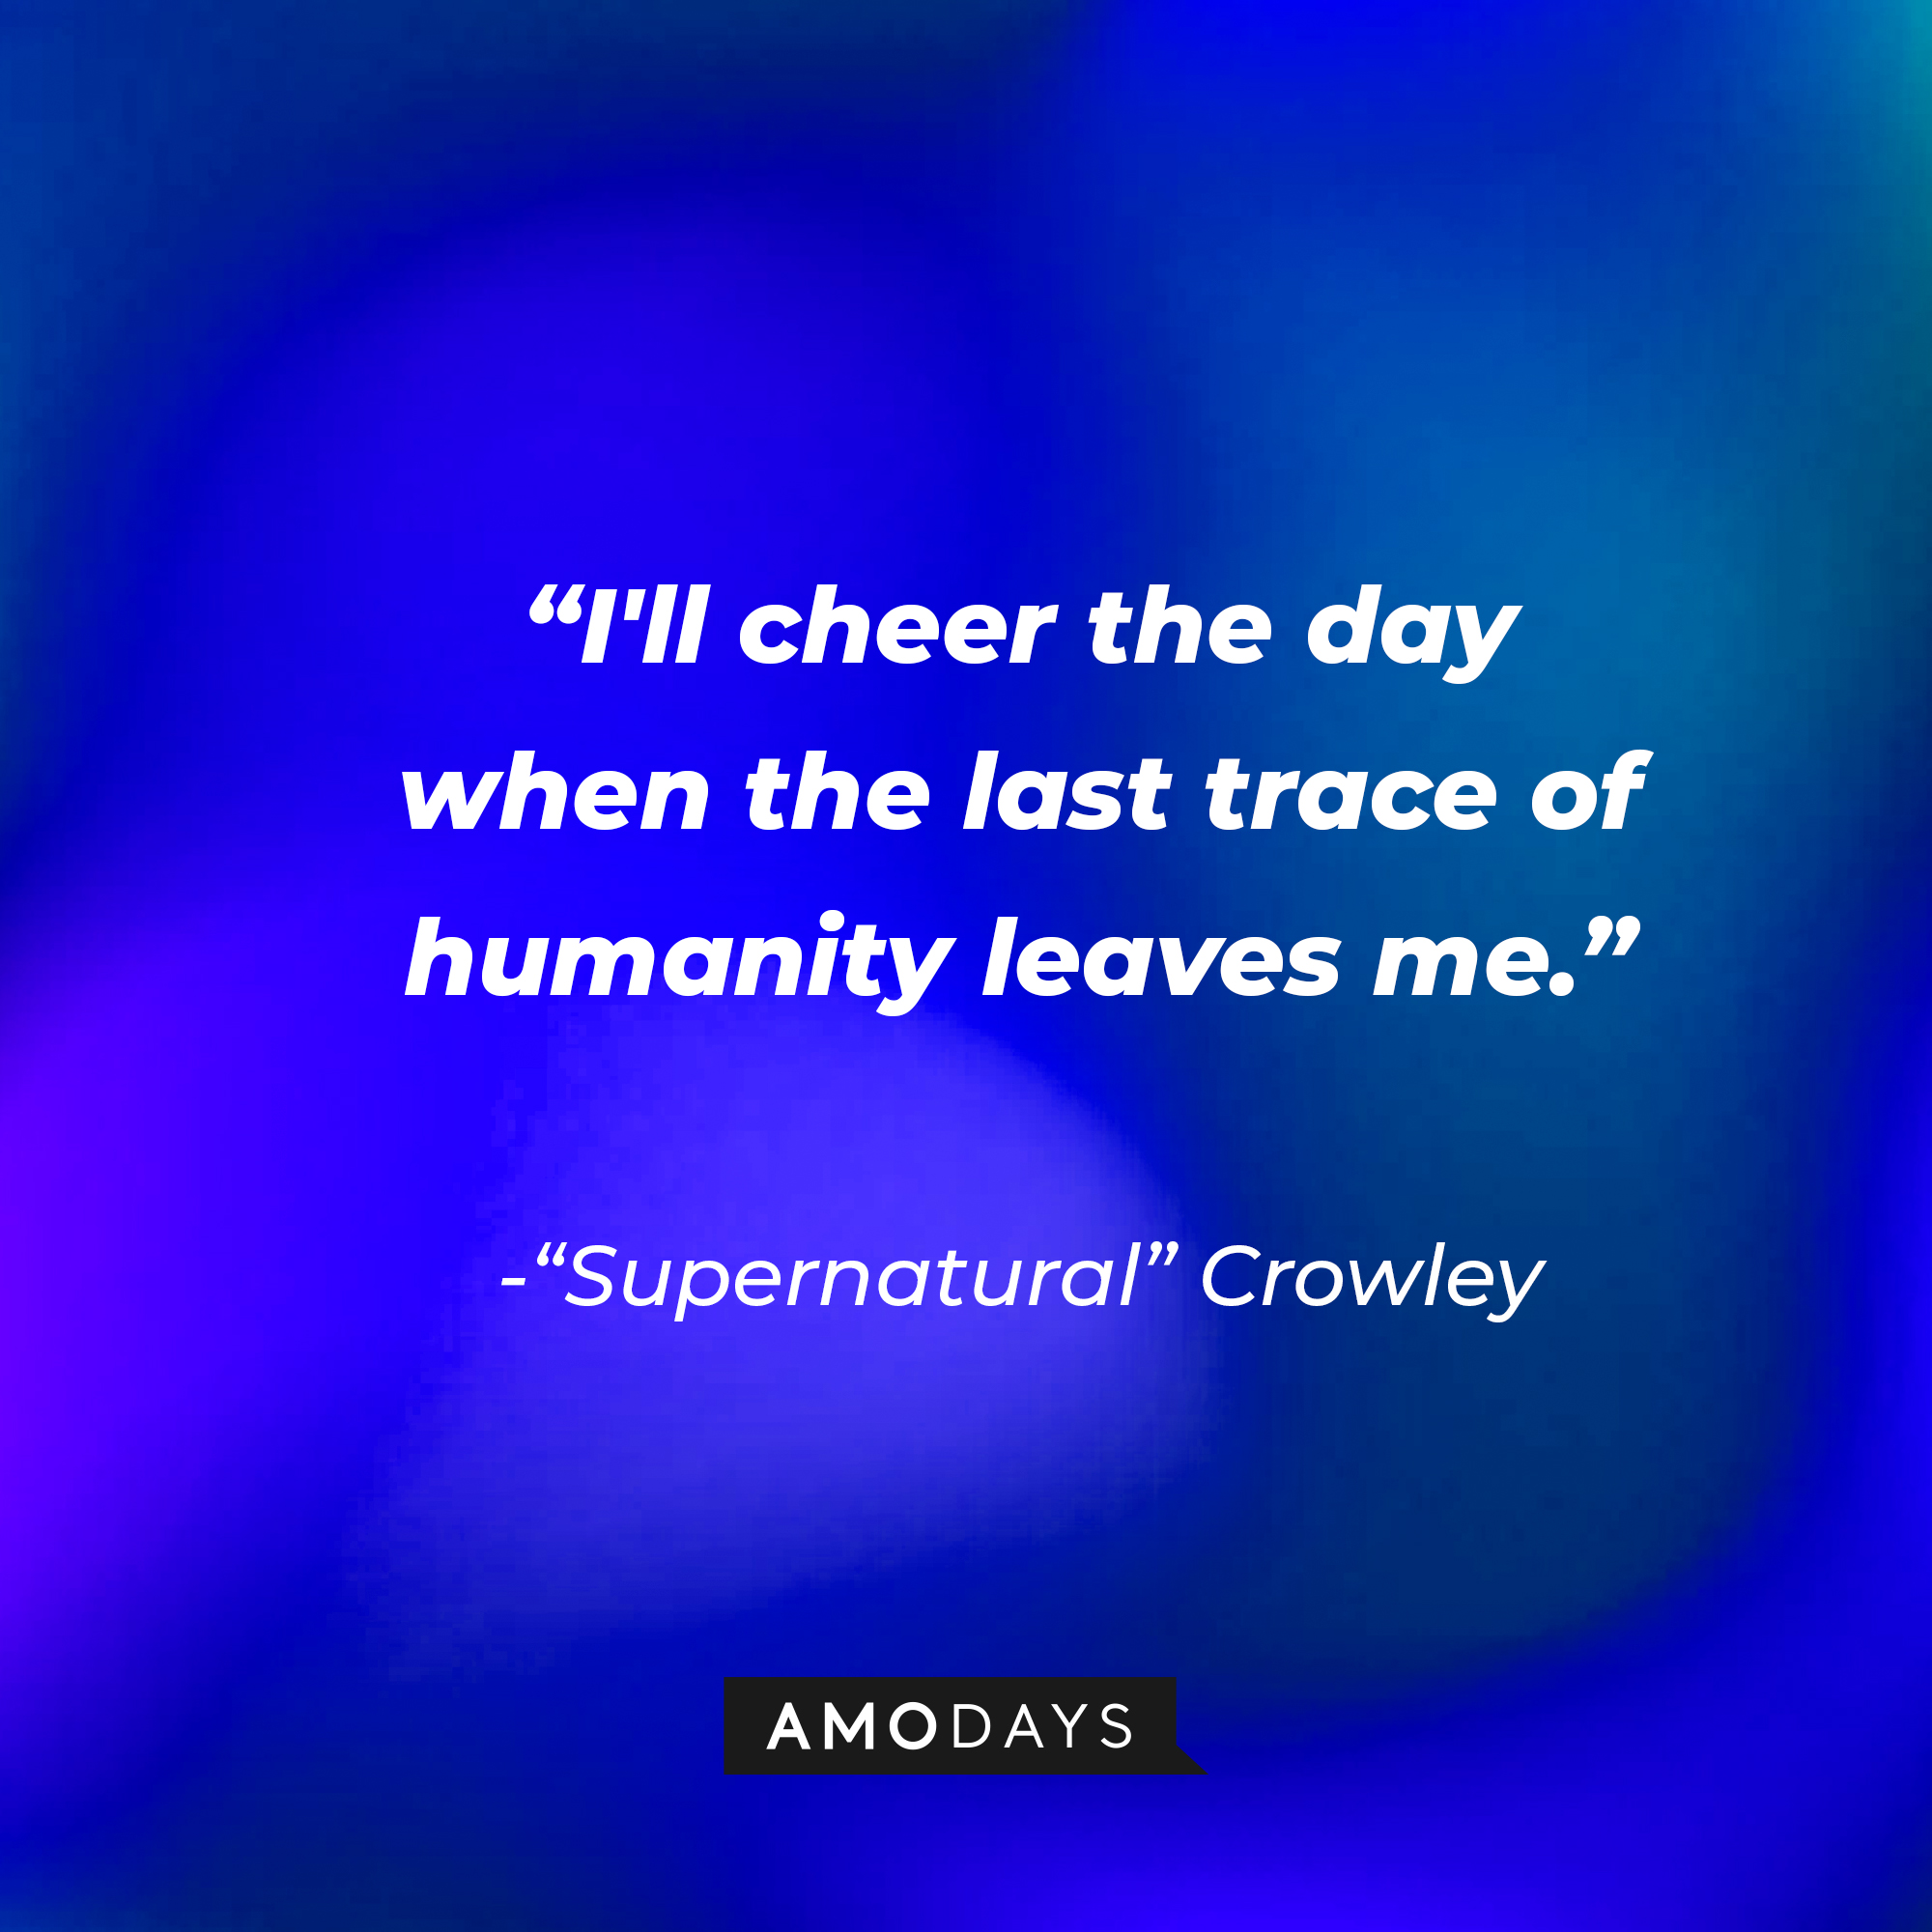 "Supernatural" Crowley's quote: "I'll cheer the day when the last trace of humanity leaves me." | Source: AmoDays